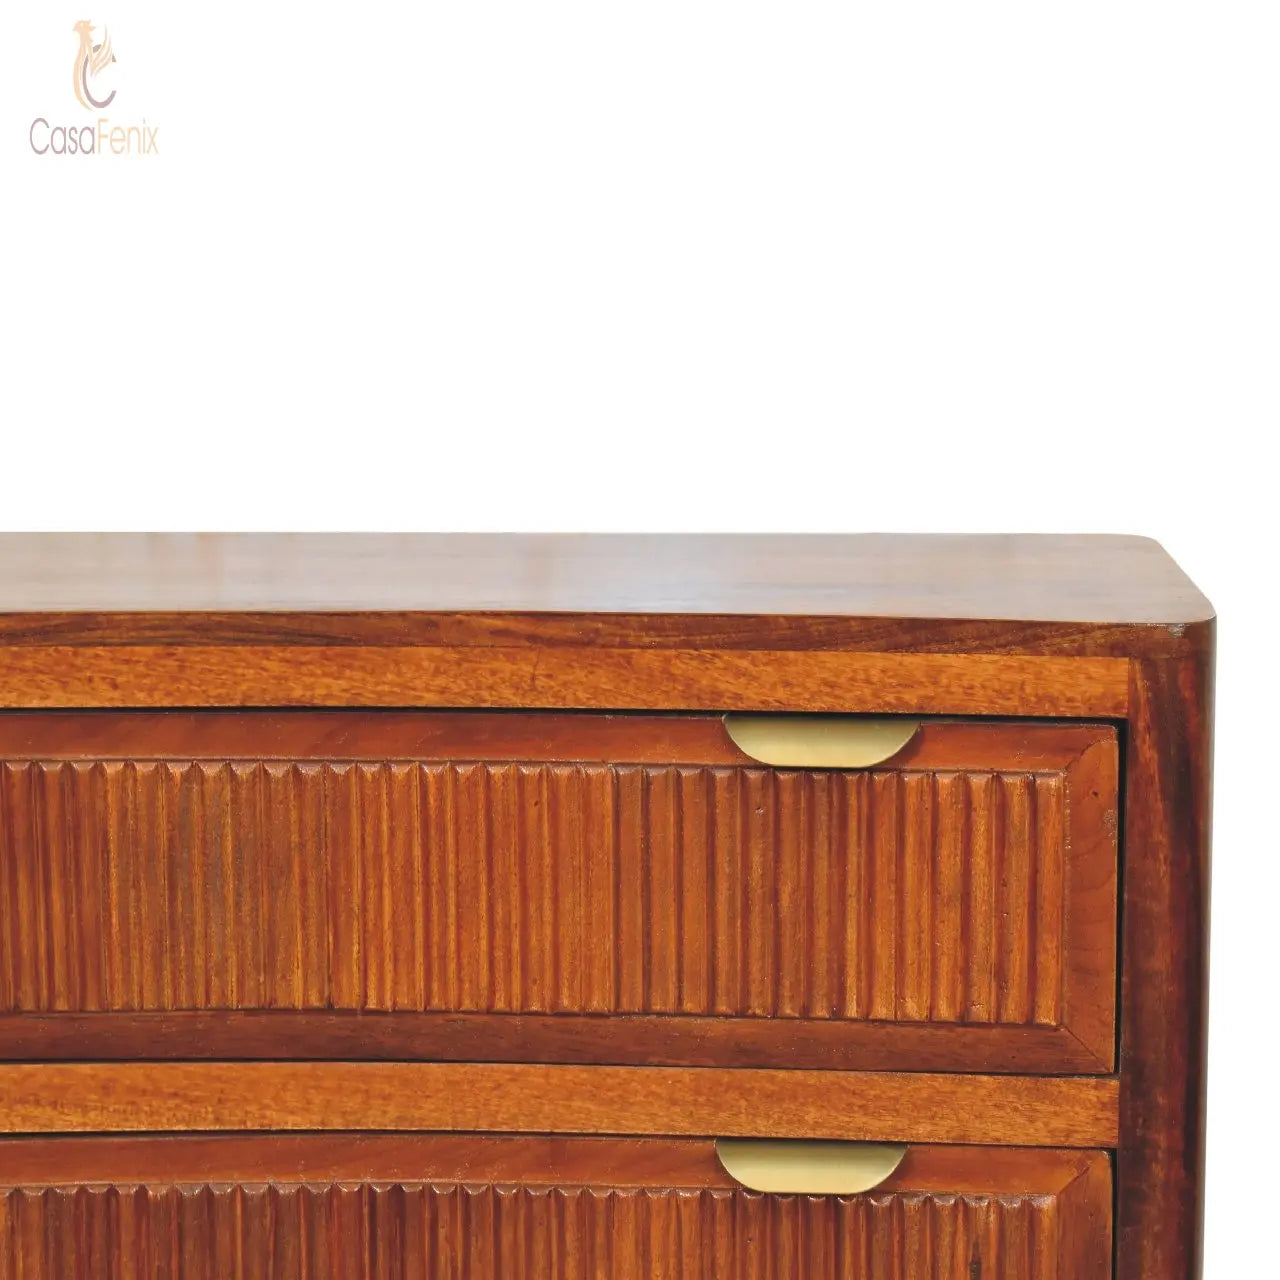 Capri Chest of 3 Drawers Nordic Design with a Chestnut Finish over Solid Mango Wood - CasaFenix